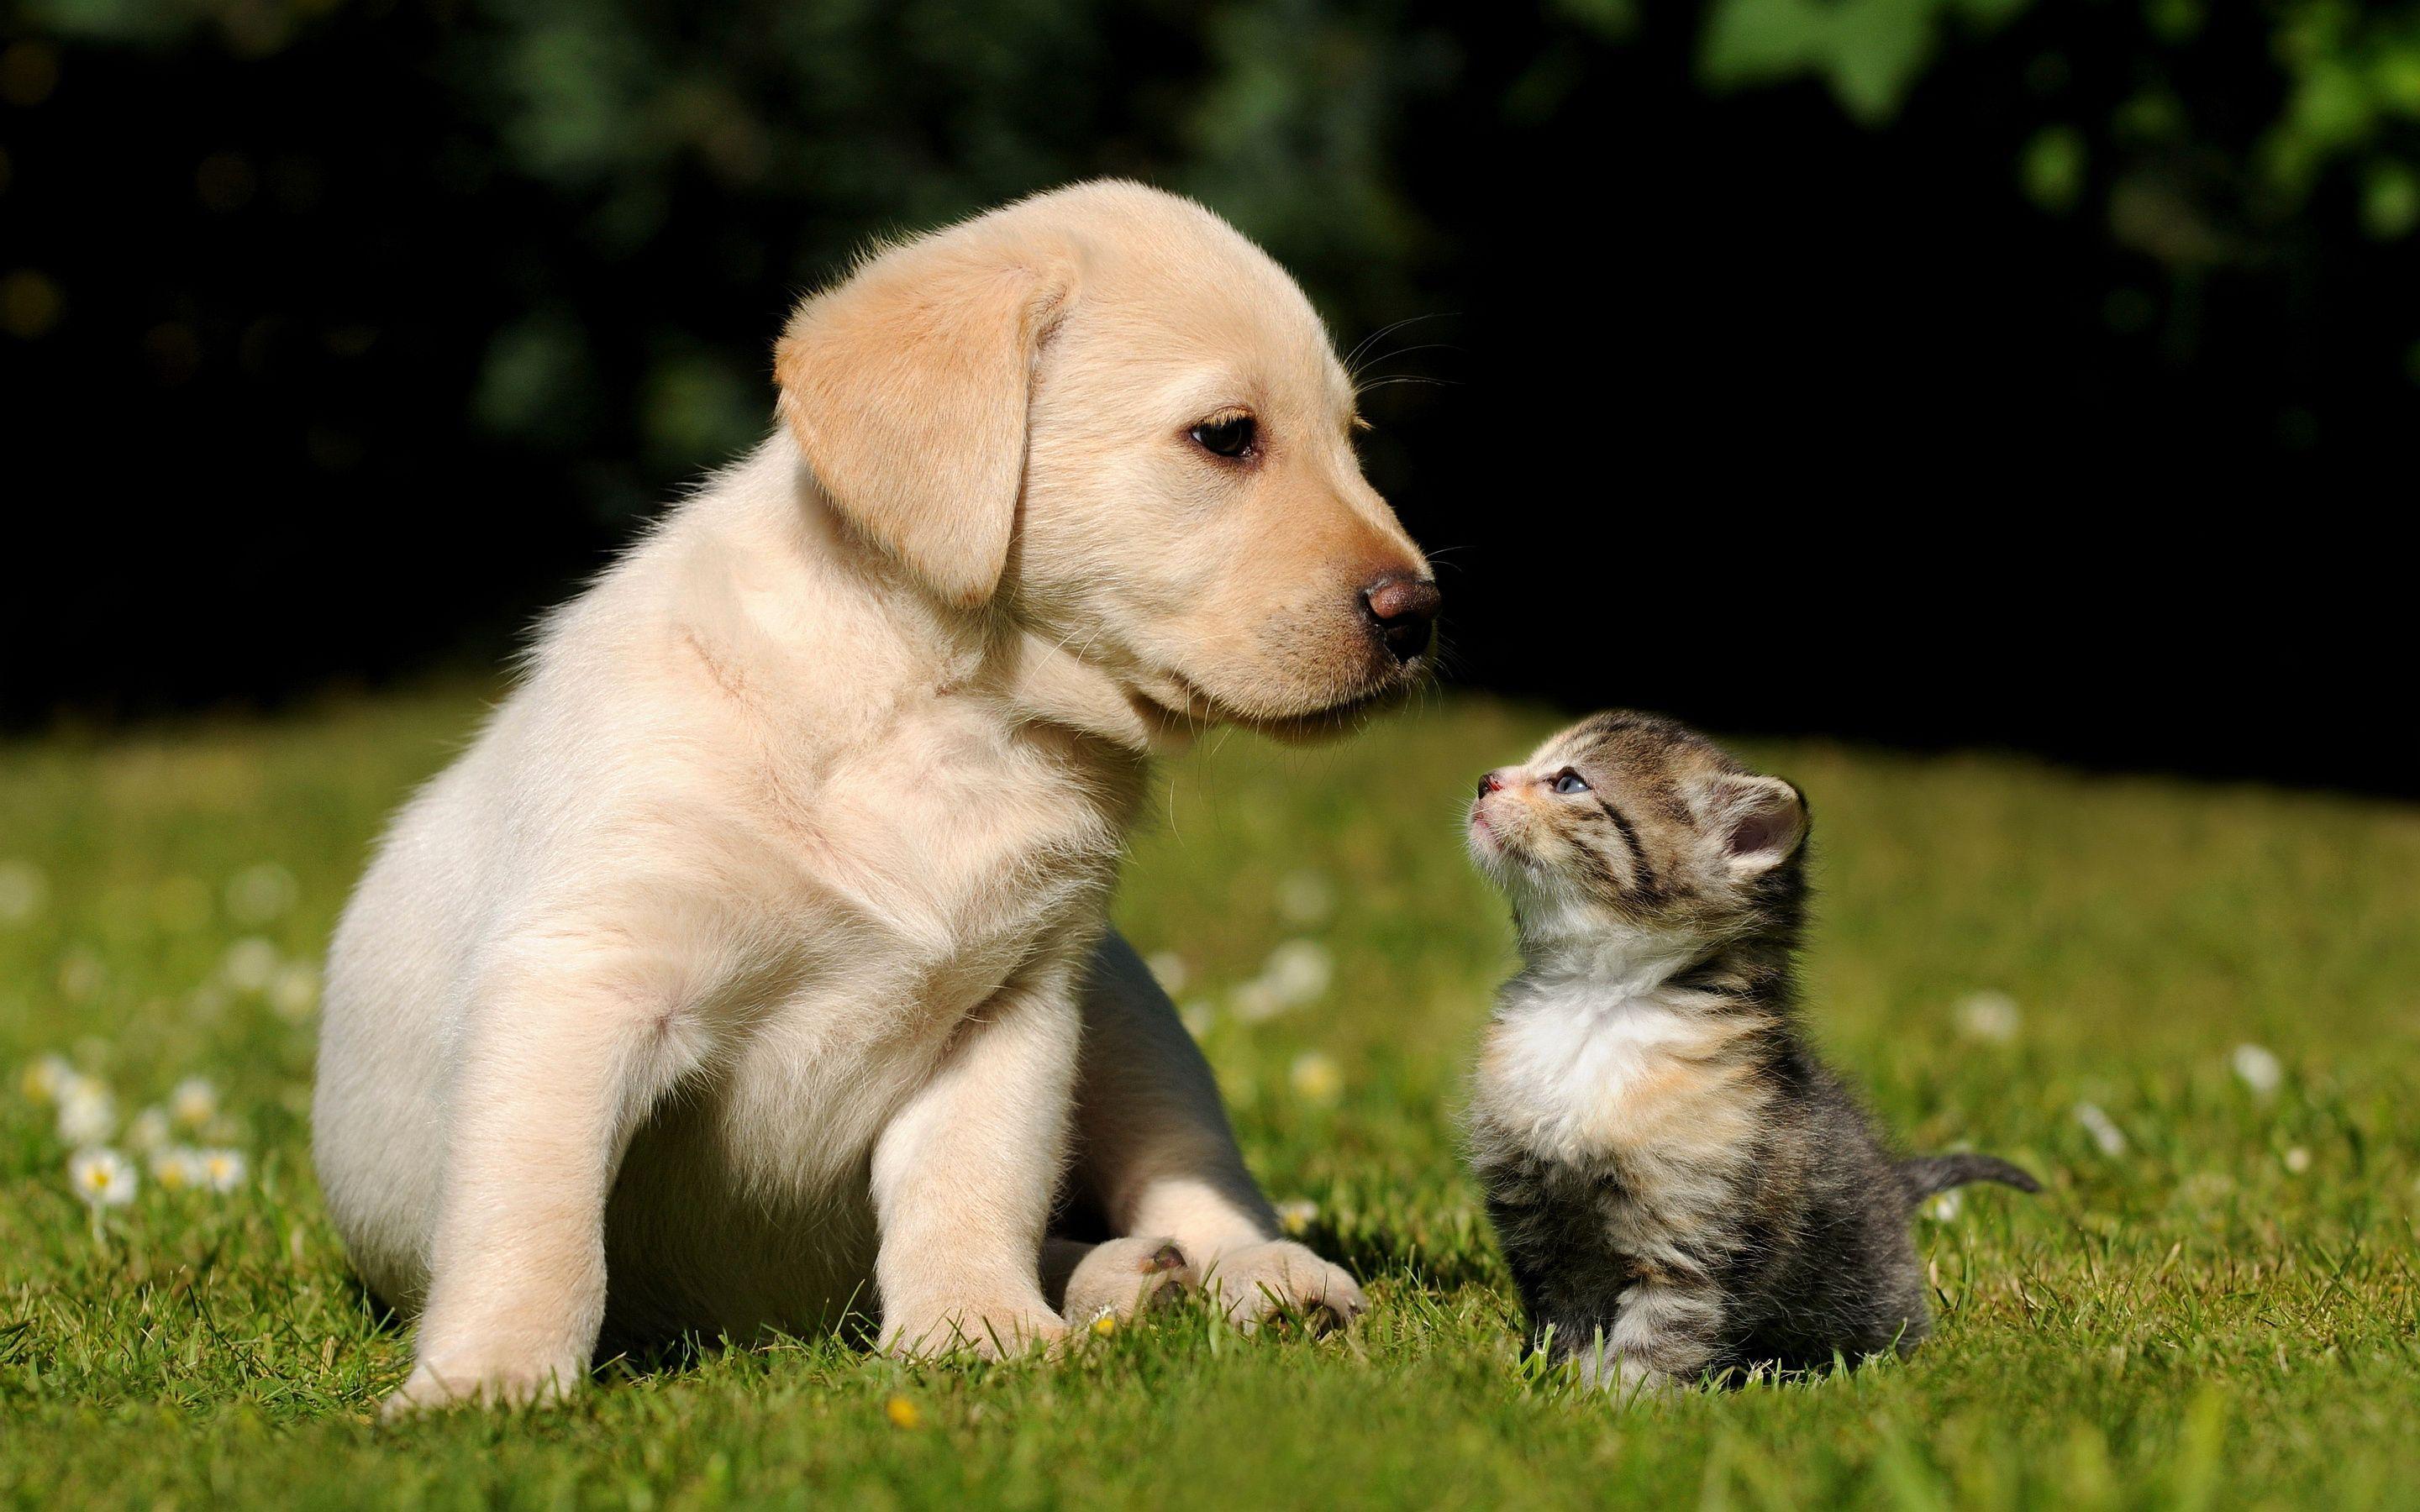 Kitten And Puppy Wallpapers - Top Free Kitten And Puppy Backgrounds